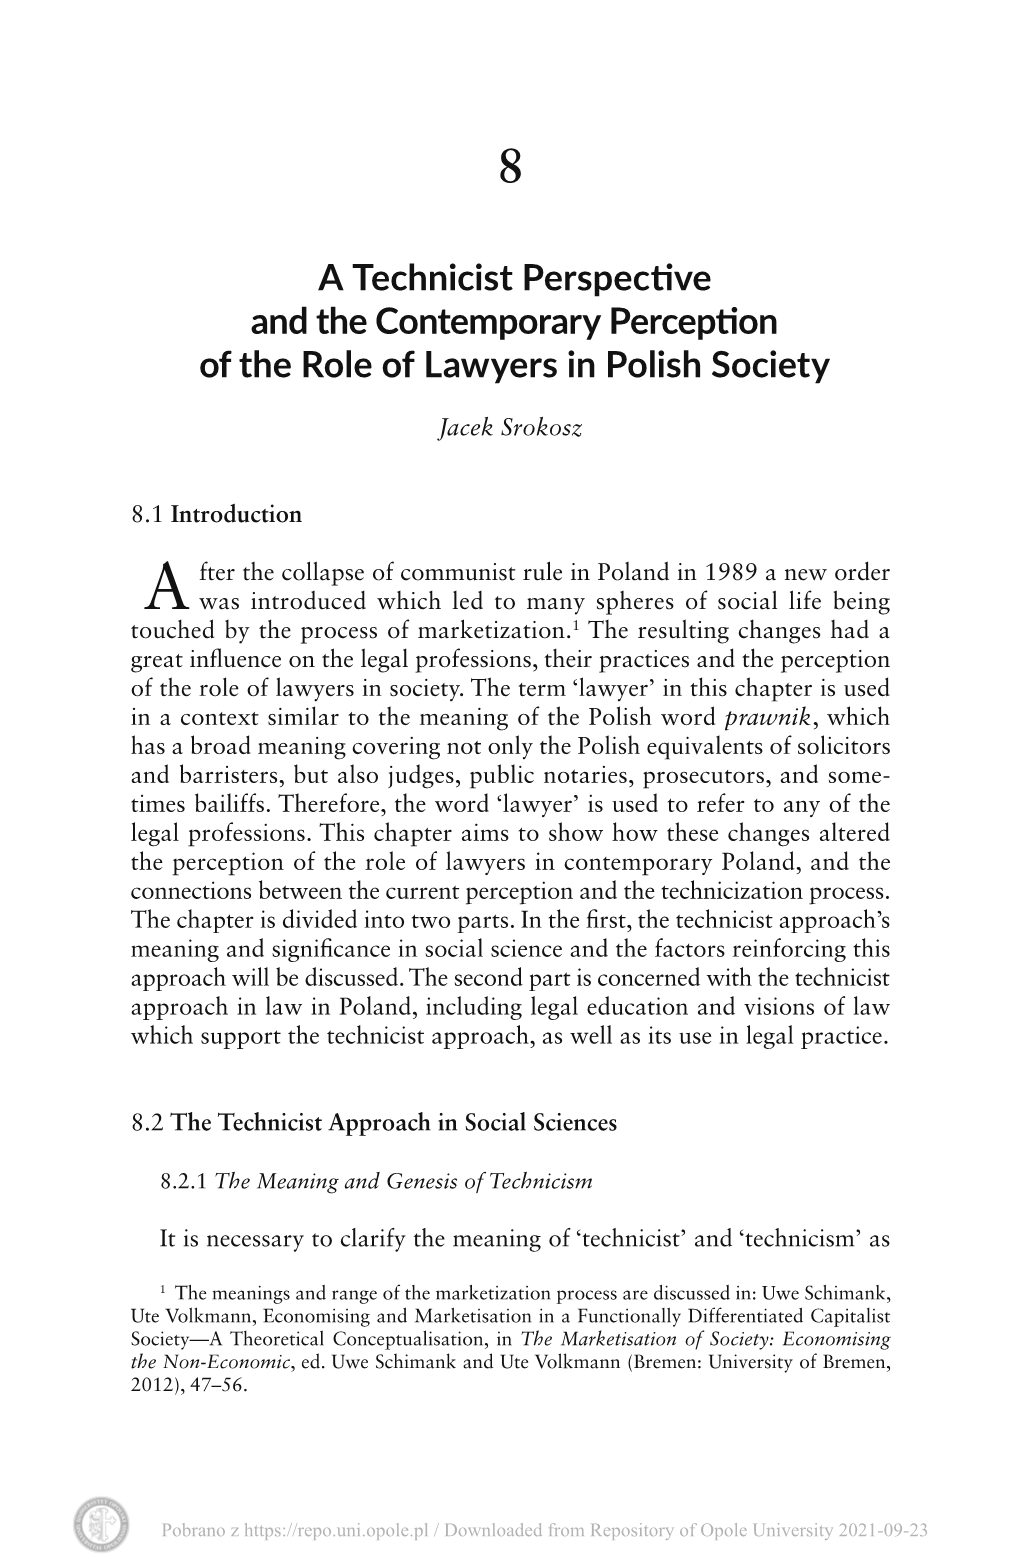 A Technicist Perspective and the Contemporary Perception of the Role of Lawyers in Polish Society